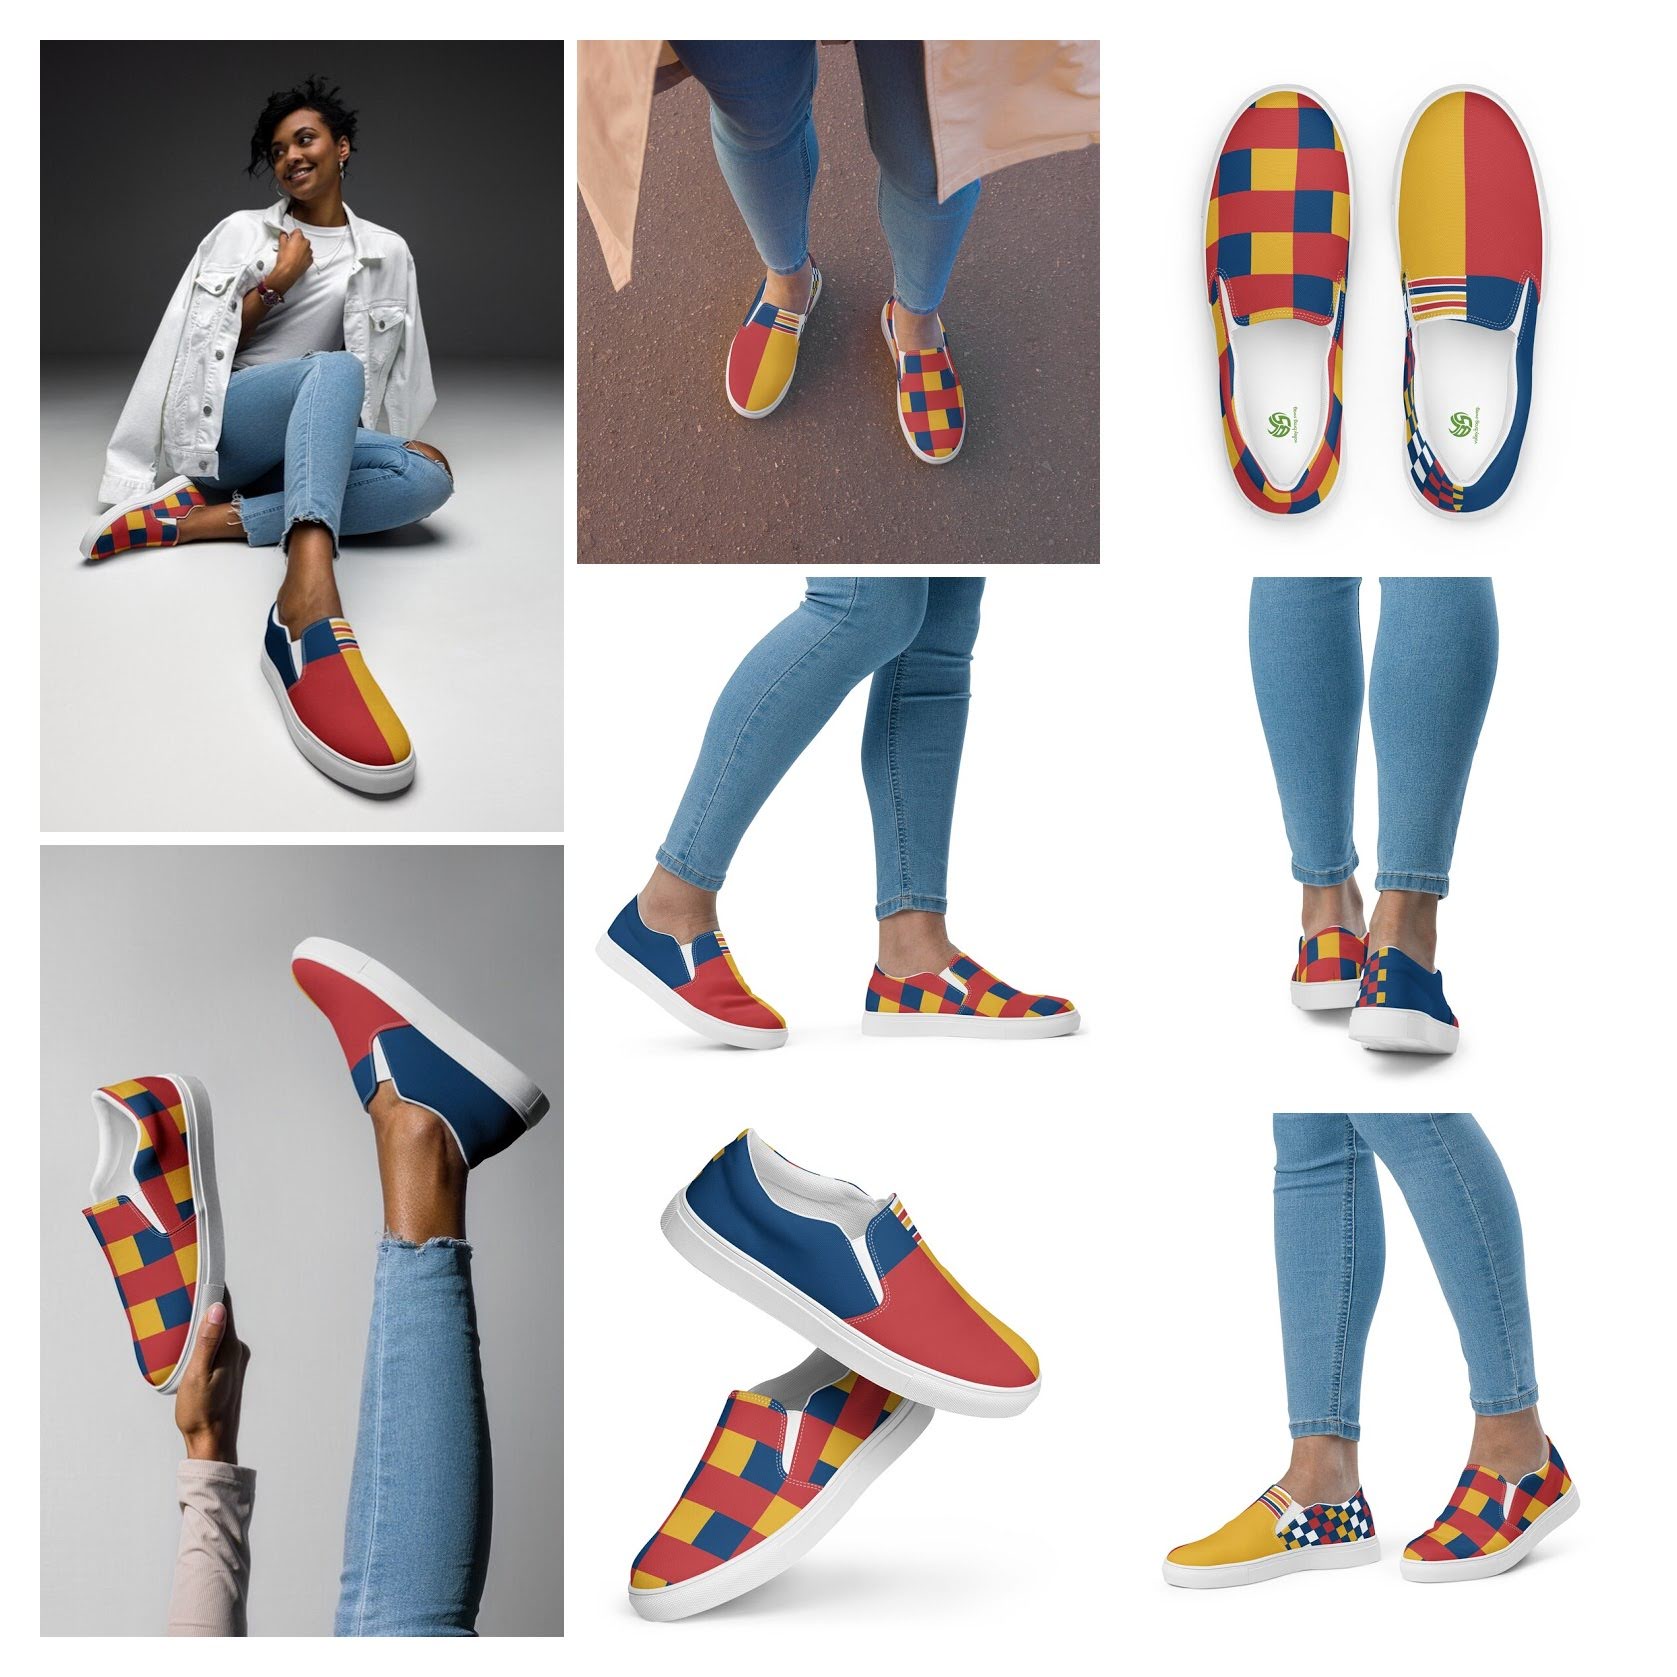 Experience the fusion of fashion and comfort with my unique collection of ladies canvas slip on shoes perfect for fearless female volleyball players of all ages